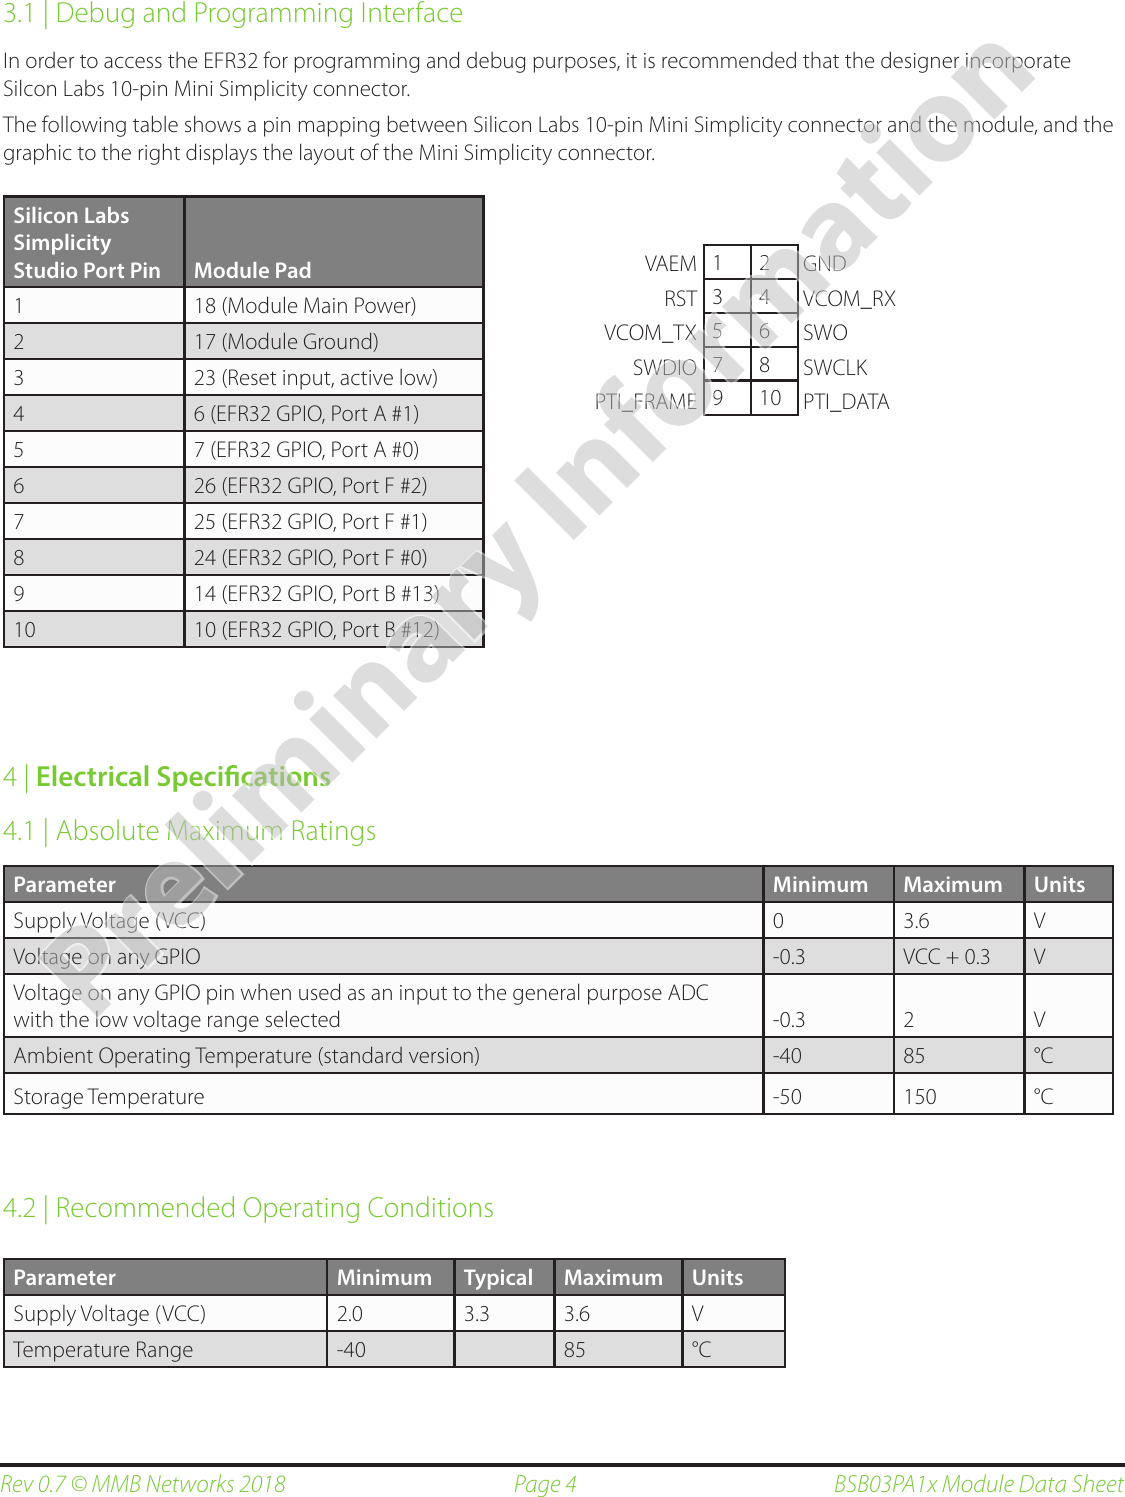 Page 4Rev 0.7 © MMB Networks 2018 BSB03PA1x Module Data Sheet3.1 | Debug and Programming InterfaceIn order to access the EFR32 for programming and debug purposes, it is recommended that the designer incorporate Silcon Labs 10-pin Mini Simplicity connector.  The following table shows a pin mapping between Silicon Labs 10-pin Mini Simplicity connector and the module, and the graphic to the right displays the layout of the Mini Simplicity connector.4 | Electrical Specications4.1 | Absolute Maximum RatingsParameter Minimum Maximum UnitsSupply Voltage (VCC) 0 3.6 VVoltage on any GPIO  -0.3 VCC + 0.3 VVoltage on any GPIO pin when used as an input to the general purpose ADC with the low voltage range selected -0.3 2 VAmbient Operating Temperature (standard version) -40 85 °CStorage Temperature -50 150 °C4.2 | Recommended Operating ConditionsSilicon Labs Simplicity Studio Port Pin Module Pad1 18 (Module Main Power)2 17 (Module Ground)3 23 (Reset input, active low)4 6 (EFR32 GPIO, Port A #1)5 7 (EFR32 GPIO, Port A #0)6 26 (EFR32 GPIO, Port F #2)7 25 (EFR32 GPIO, Port F #1)8 24 (EFR32 GPIO, Port F #0)9 14 (EFR32 GPIO, Port B #13)10 10 (EFR32 GPIO, Port B #12)Parameter Minimum Typical Maximum UnitsSupply Voltage (VCC) 2.0 3.3 3.6 VTemperature Range -40 85 °C1 23 45 67 89 10VAEMRSTVCOM_TXSWDIOPTI_FRAMEGNDVCOM_RXSWOSWCLKPTI_DATAPreliminary Information